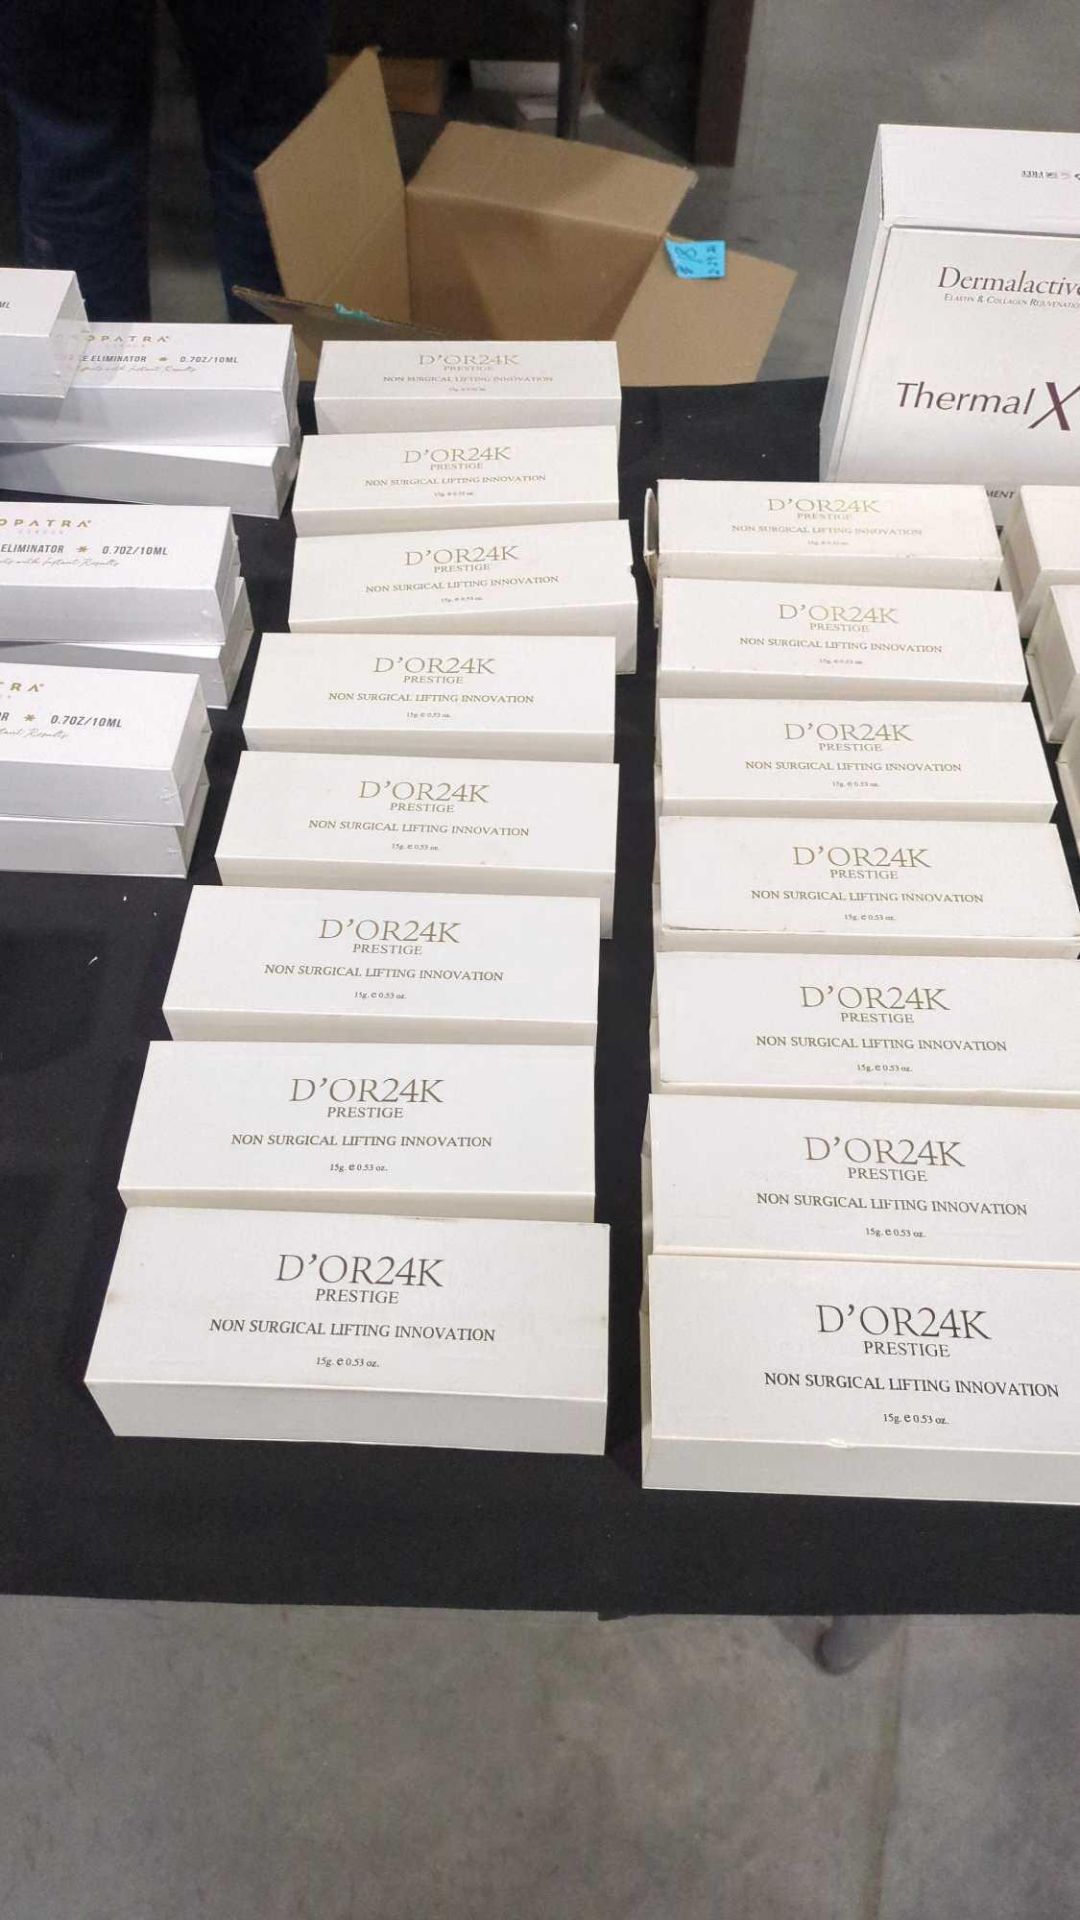 D'or 24K prestige products, opatra products dermolactives thermal X and more - Image 3 of 22